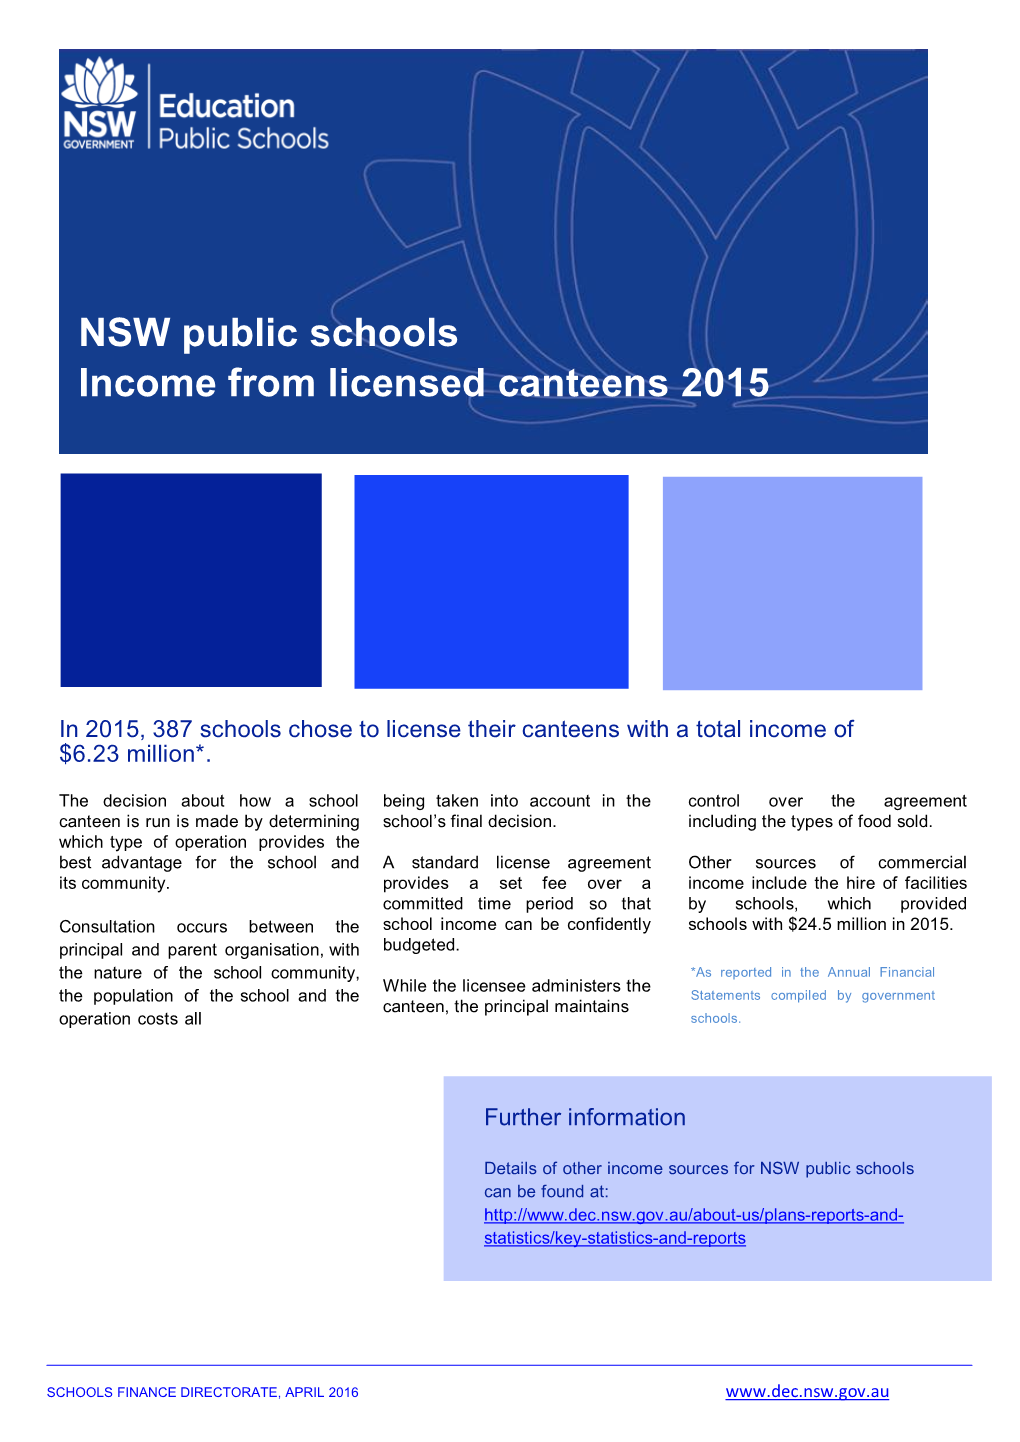 NSW Public Schools Income from Licensed Canteens 2015